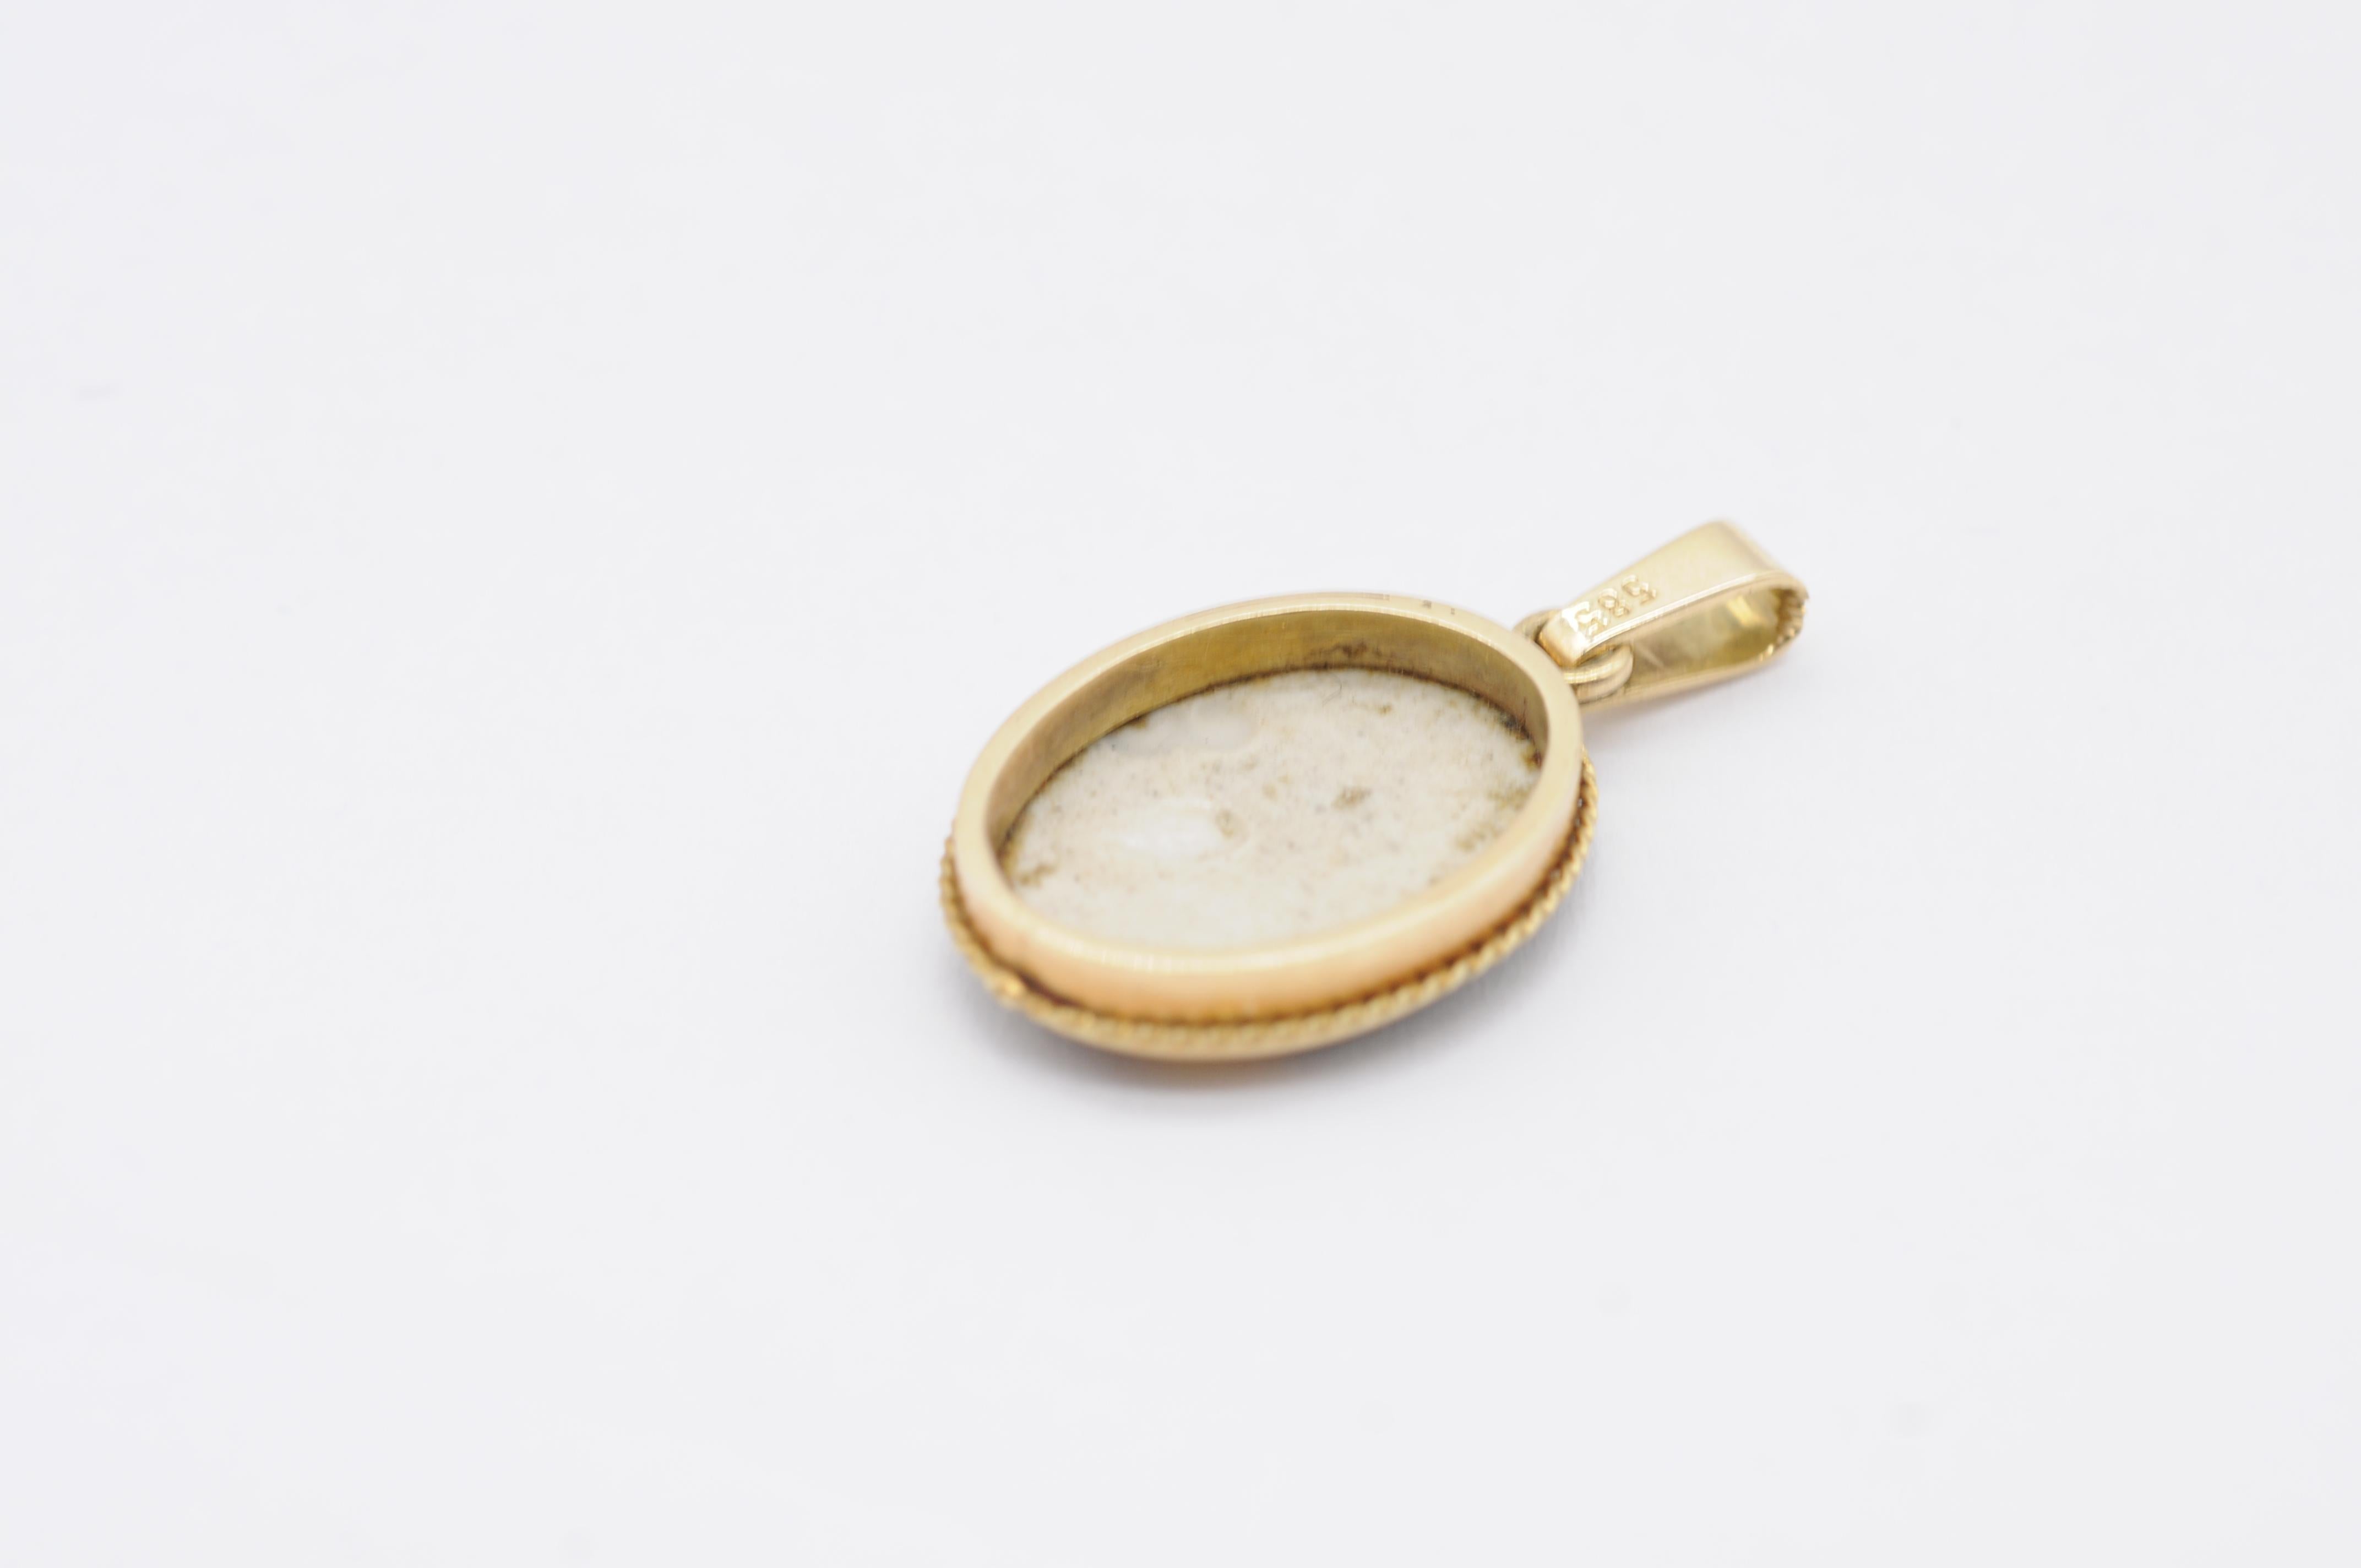 majestic pendant made of 14k yellow gold porcelain For Sale 6